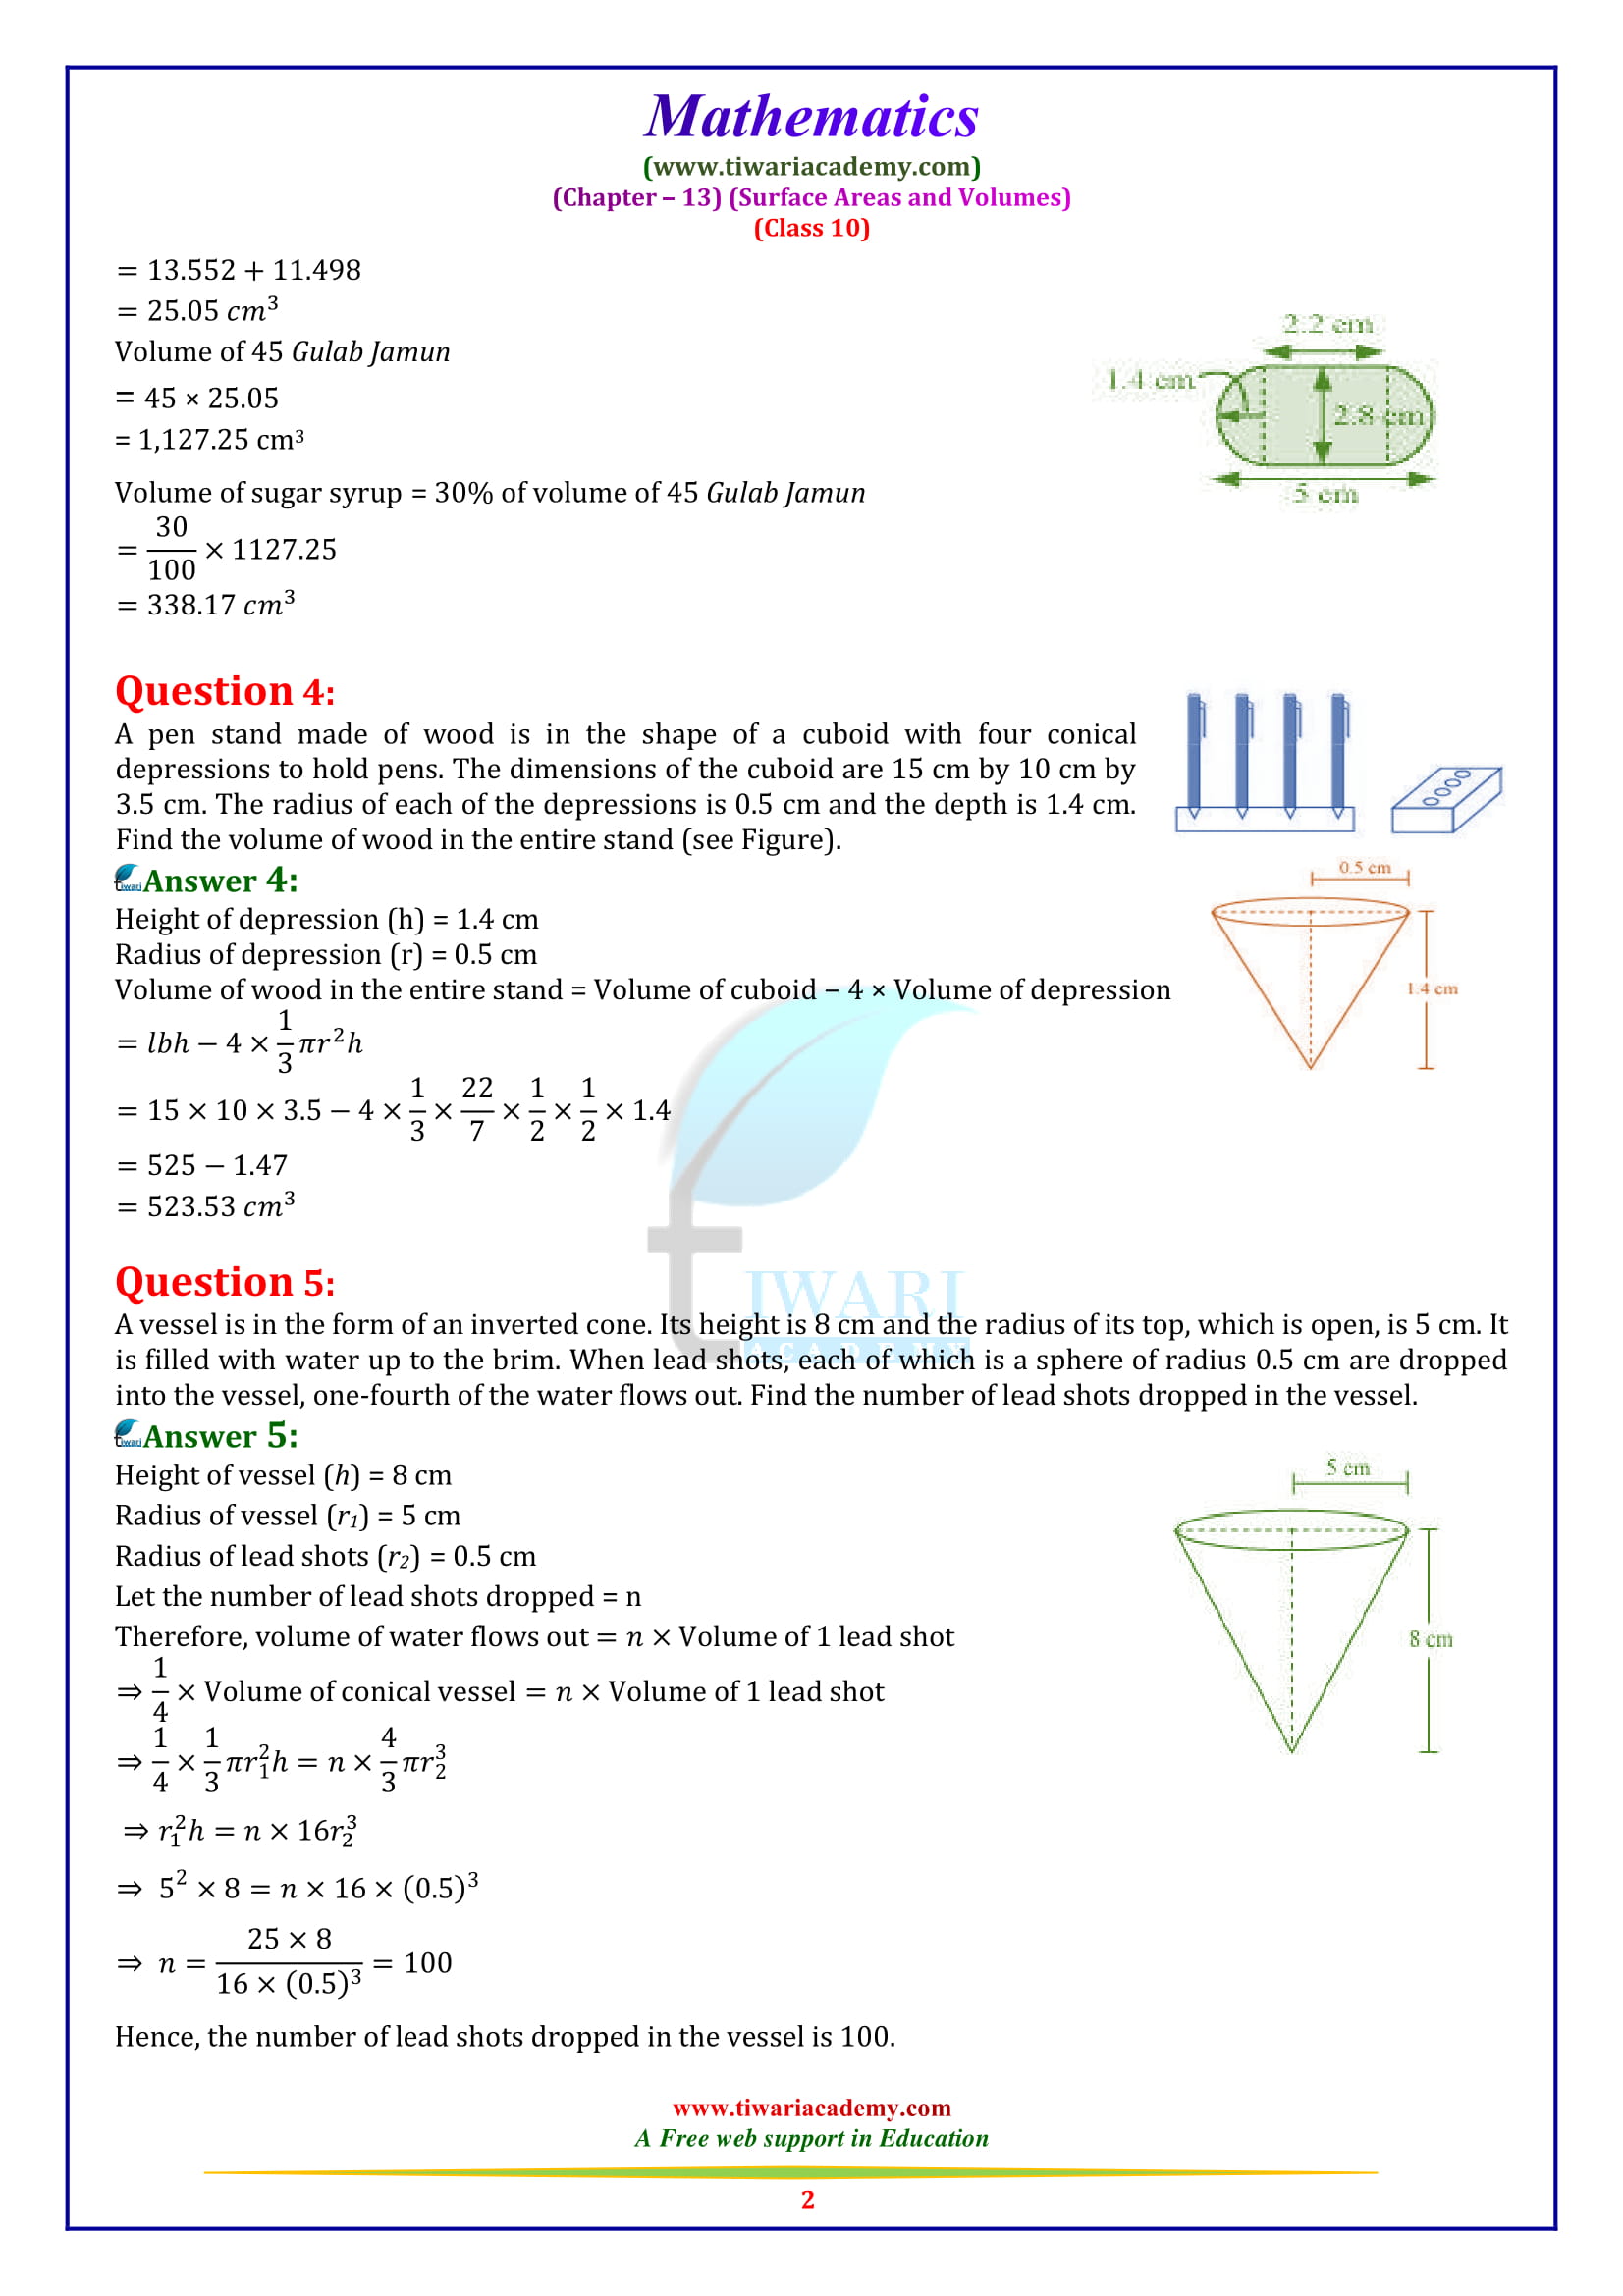 NCERT Solutions for Class 10 Maths Chapter 13 Exercise 13.2 surface areas and volumes in English medium free for 2018-19.